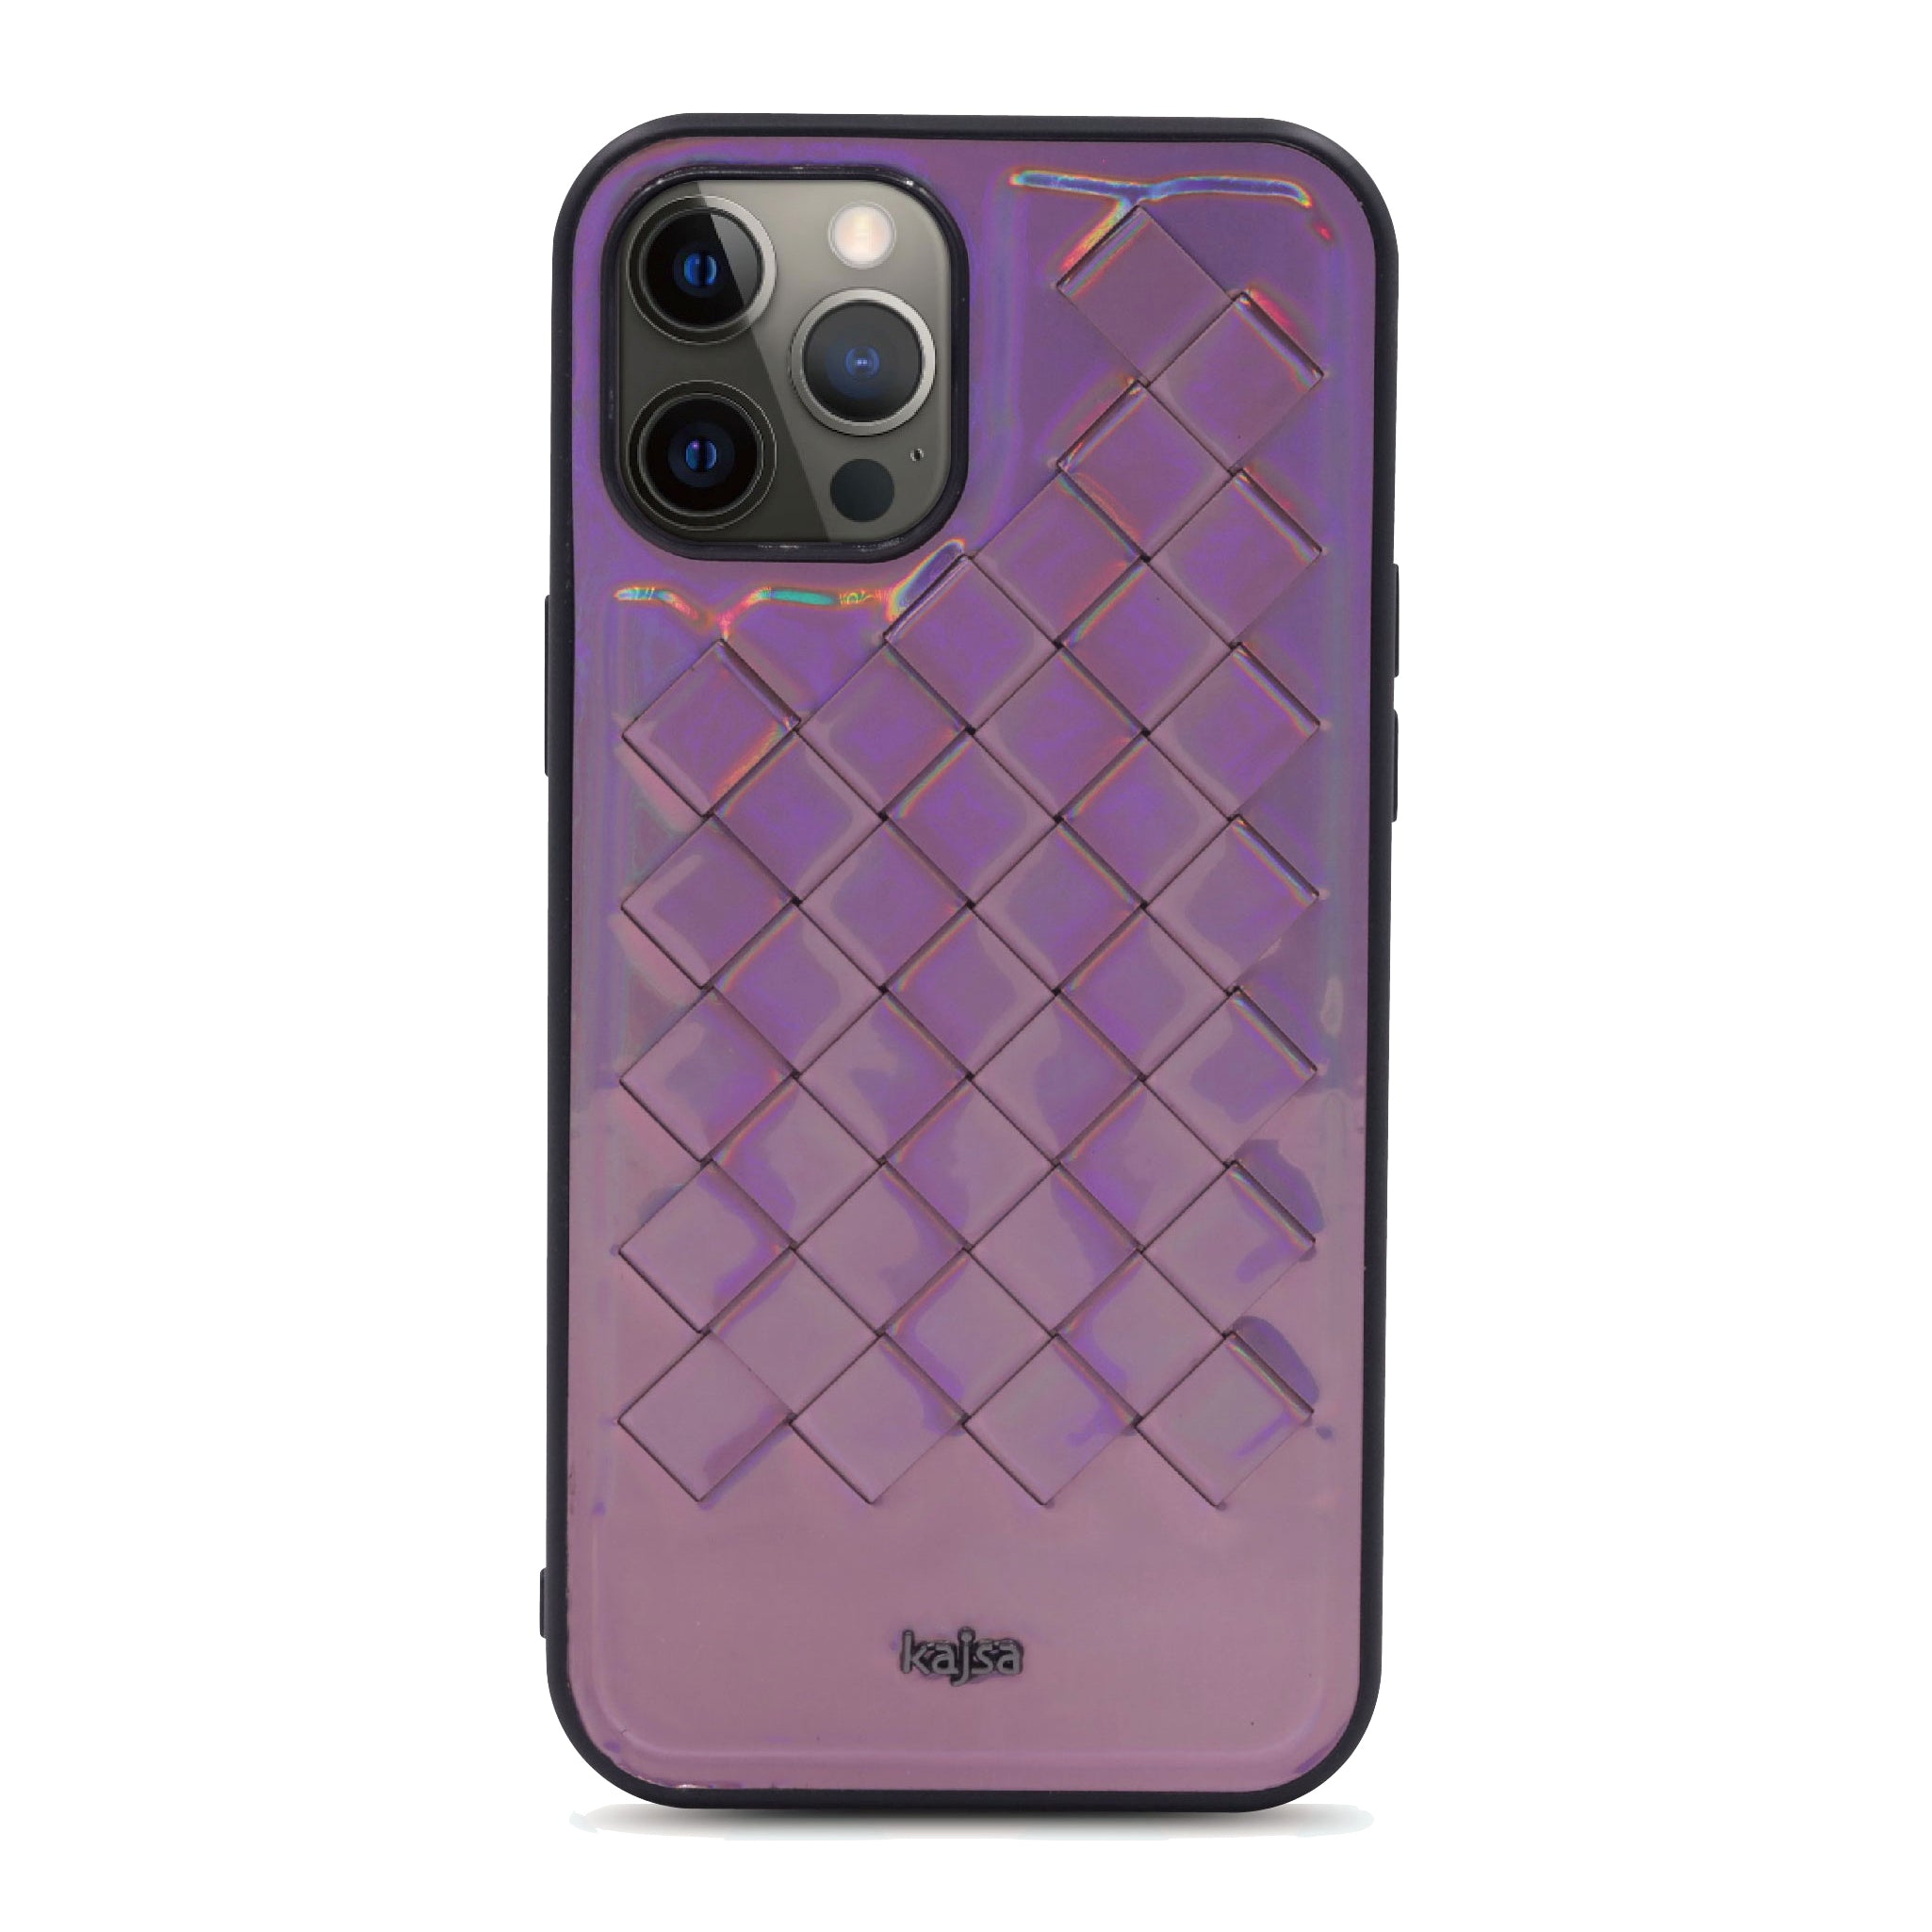 Preppie Collection - Sunshine Woven Back Case for iPhone 12-Phone Case- phone case - phone cases- phone cover- iphone cover- iphone case- iphone cases- leather case- leather cases- DIYCASE - custom case - leather cover - hand strap case - croco pattern case - snake pattern case - carbon fiber phone case - phone case brand - unique phone case - high quality - phone case brand - protective case - buy phone case hong kong - online buy phone case - iphone‎手機殼 - 客製化手機殼 - samsung ‎手機殼 - 香港手機殼 - 買電話殼